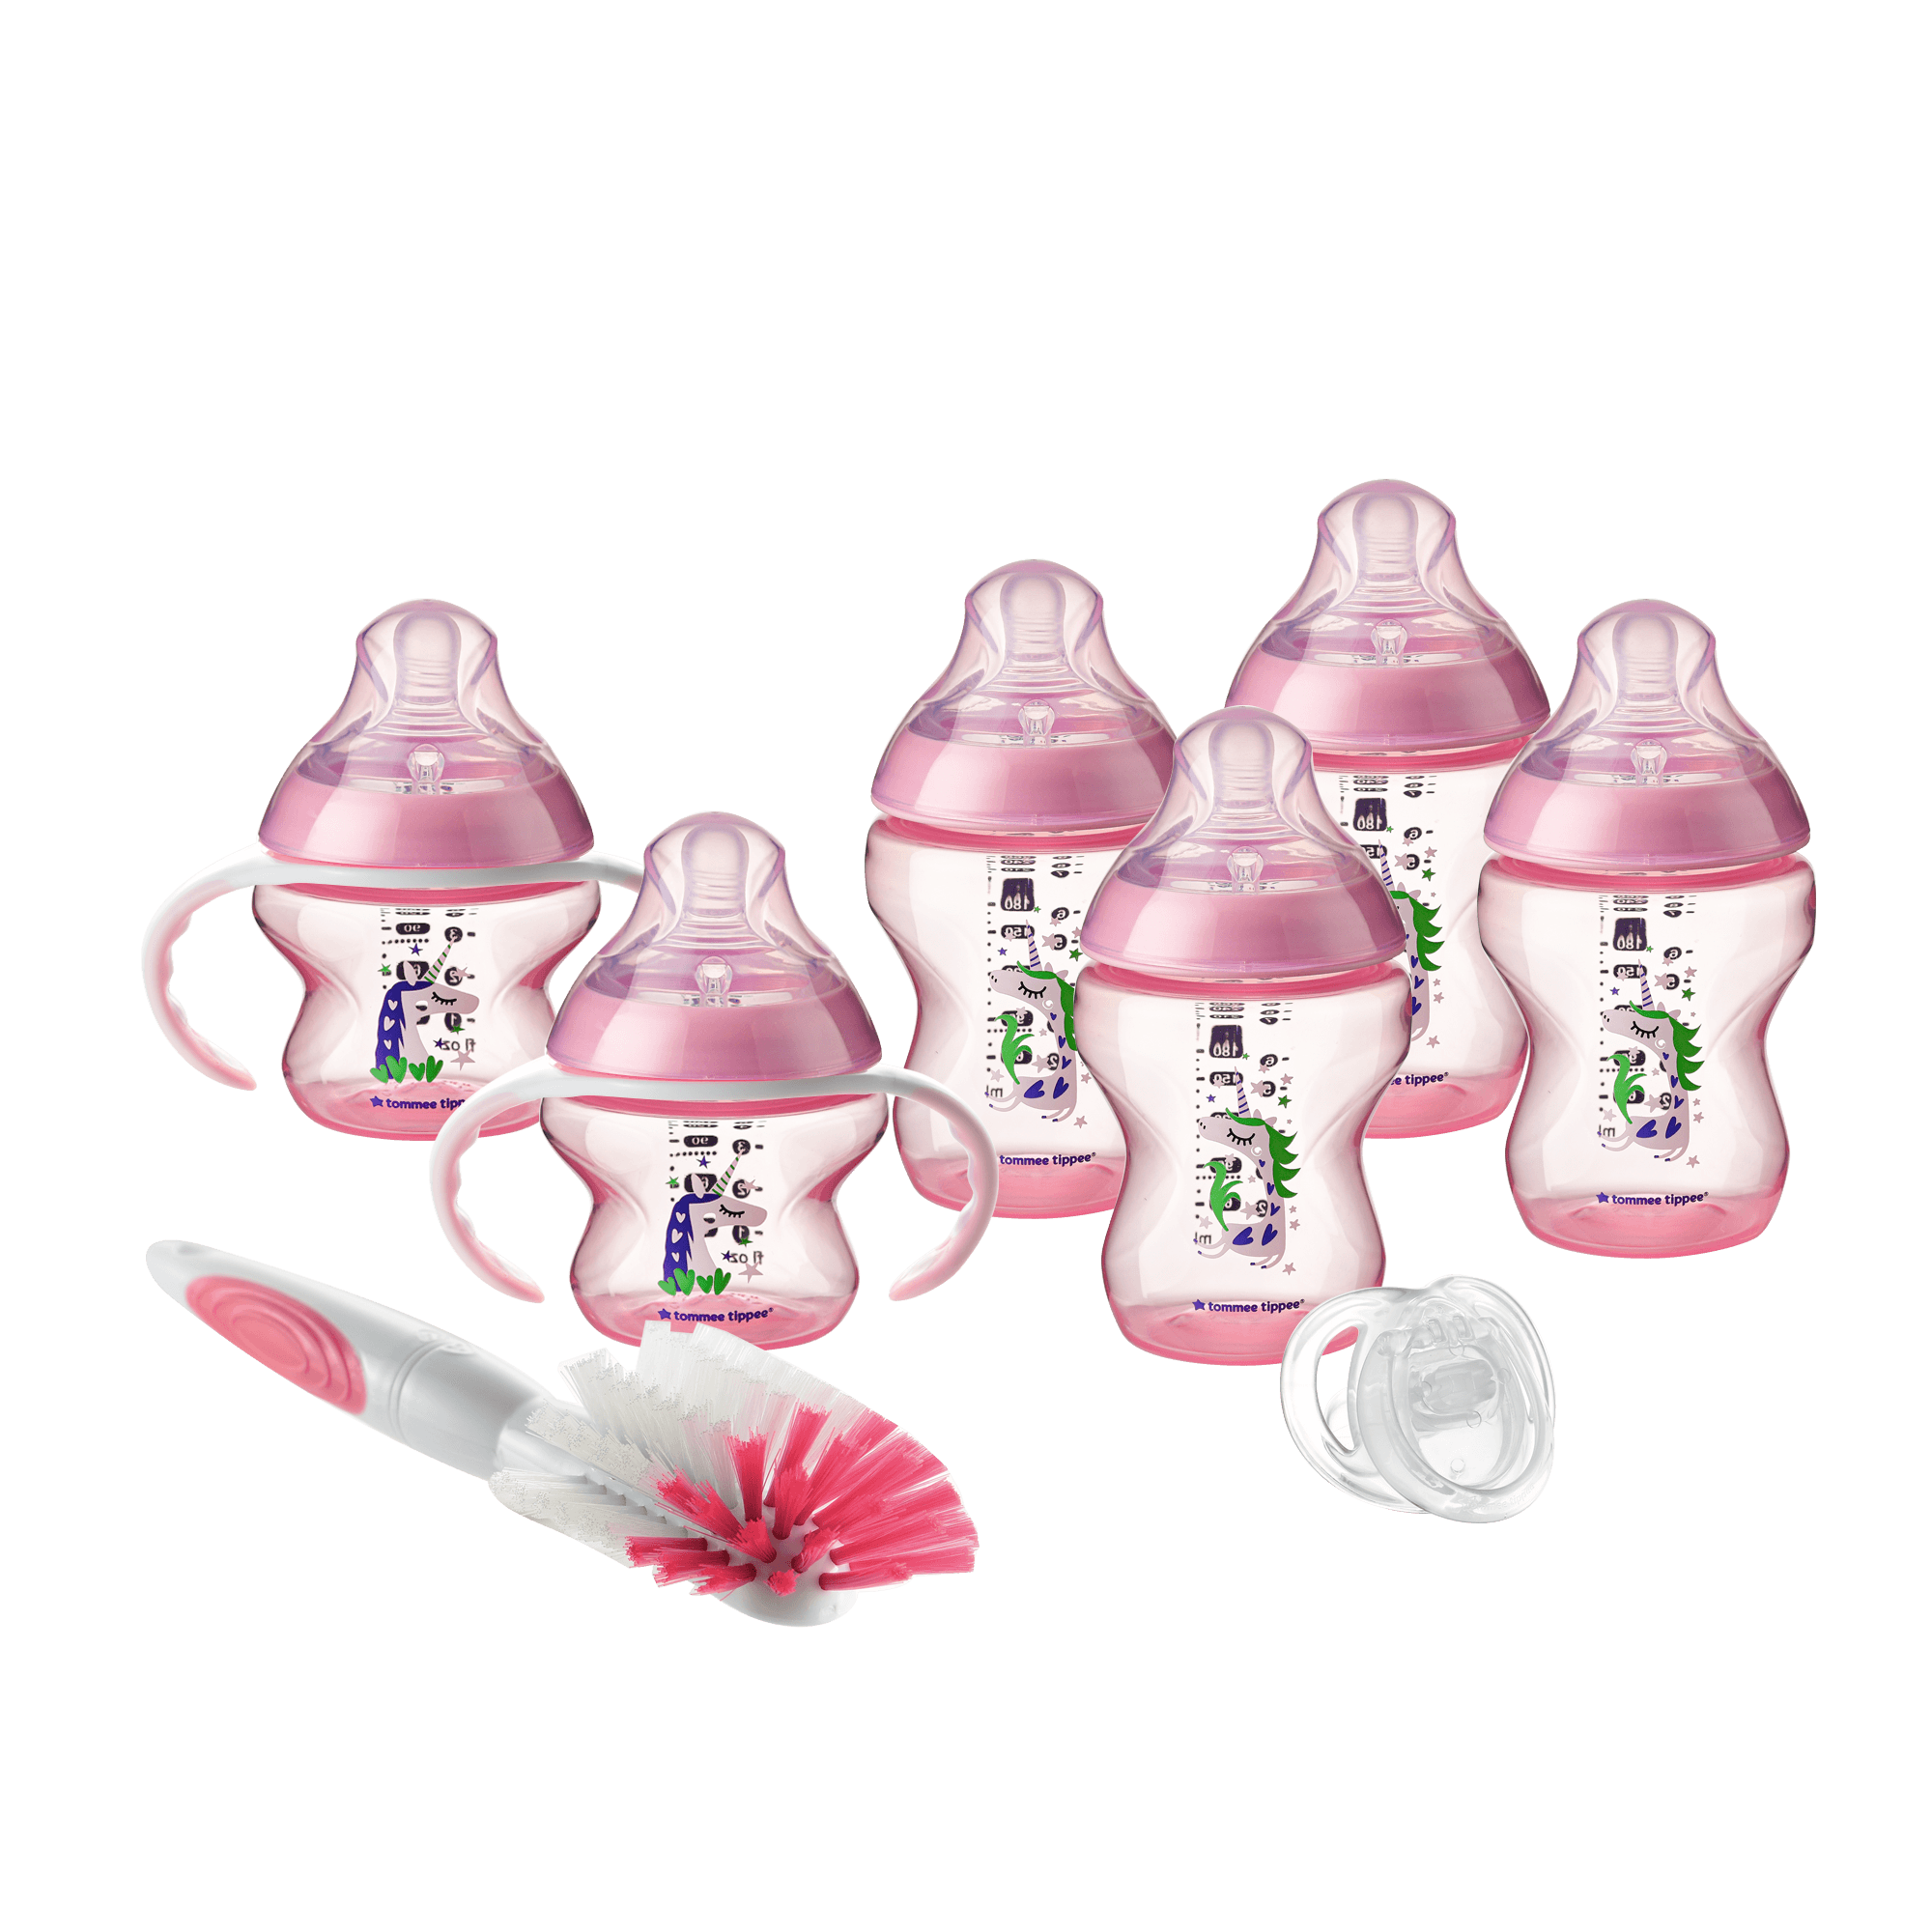 closer to nature® PP 印花奶瓶套裝 -配新乳感超柔軟奶嘴 - Tommee Tippee 香港官方網店